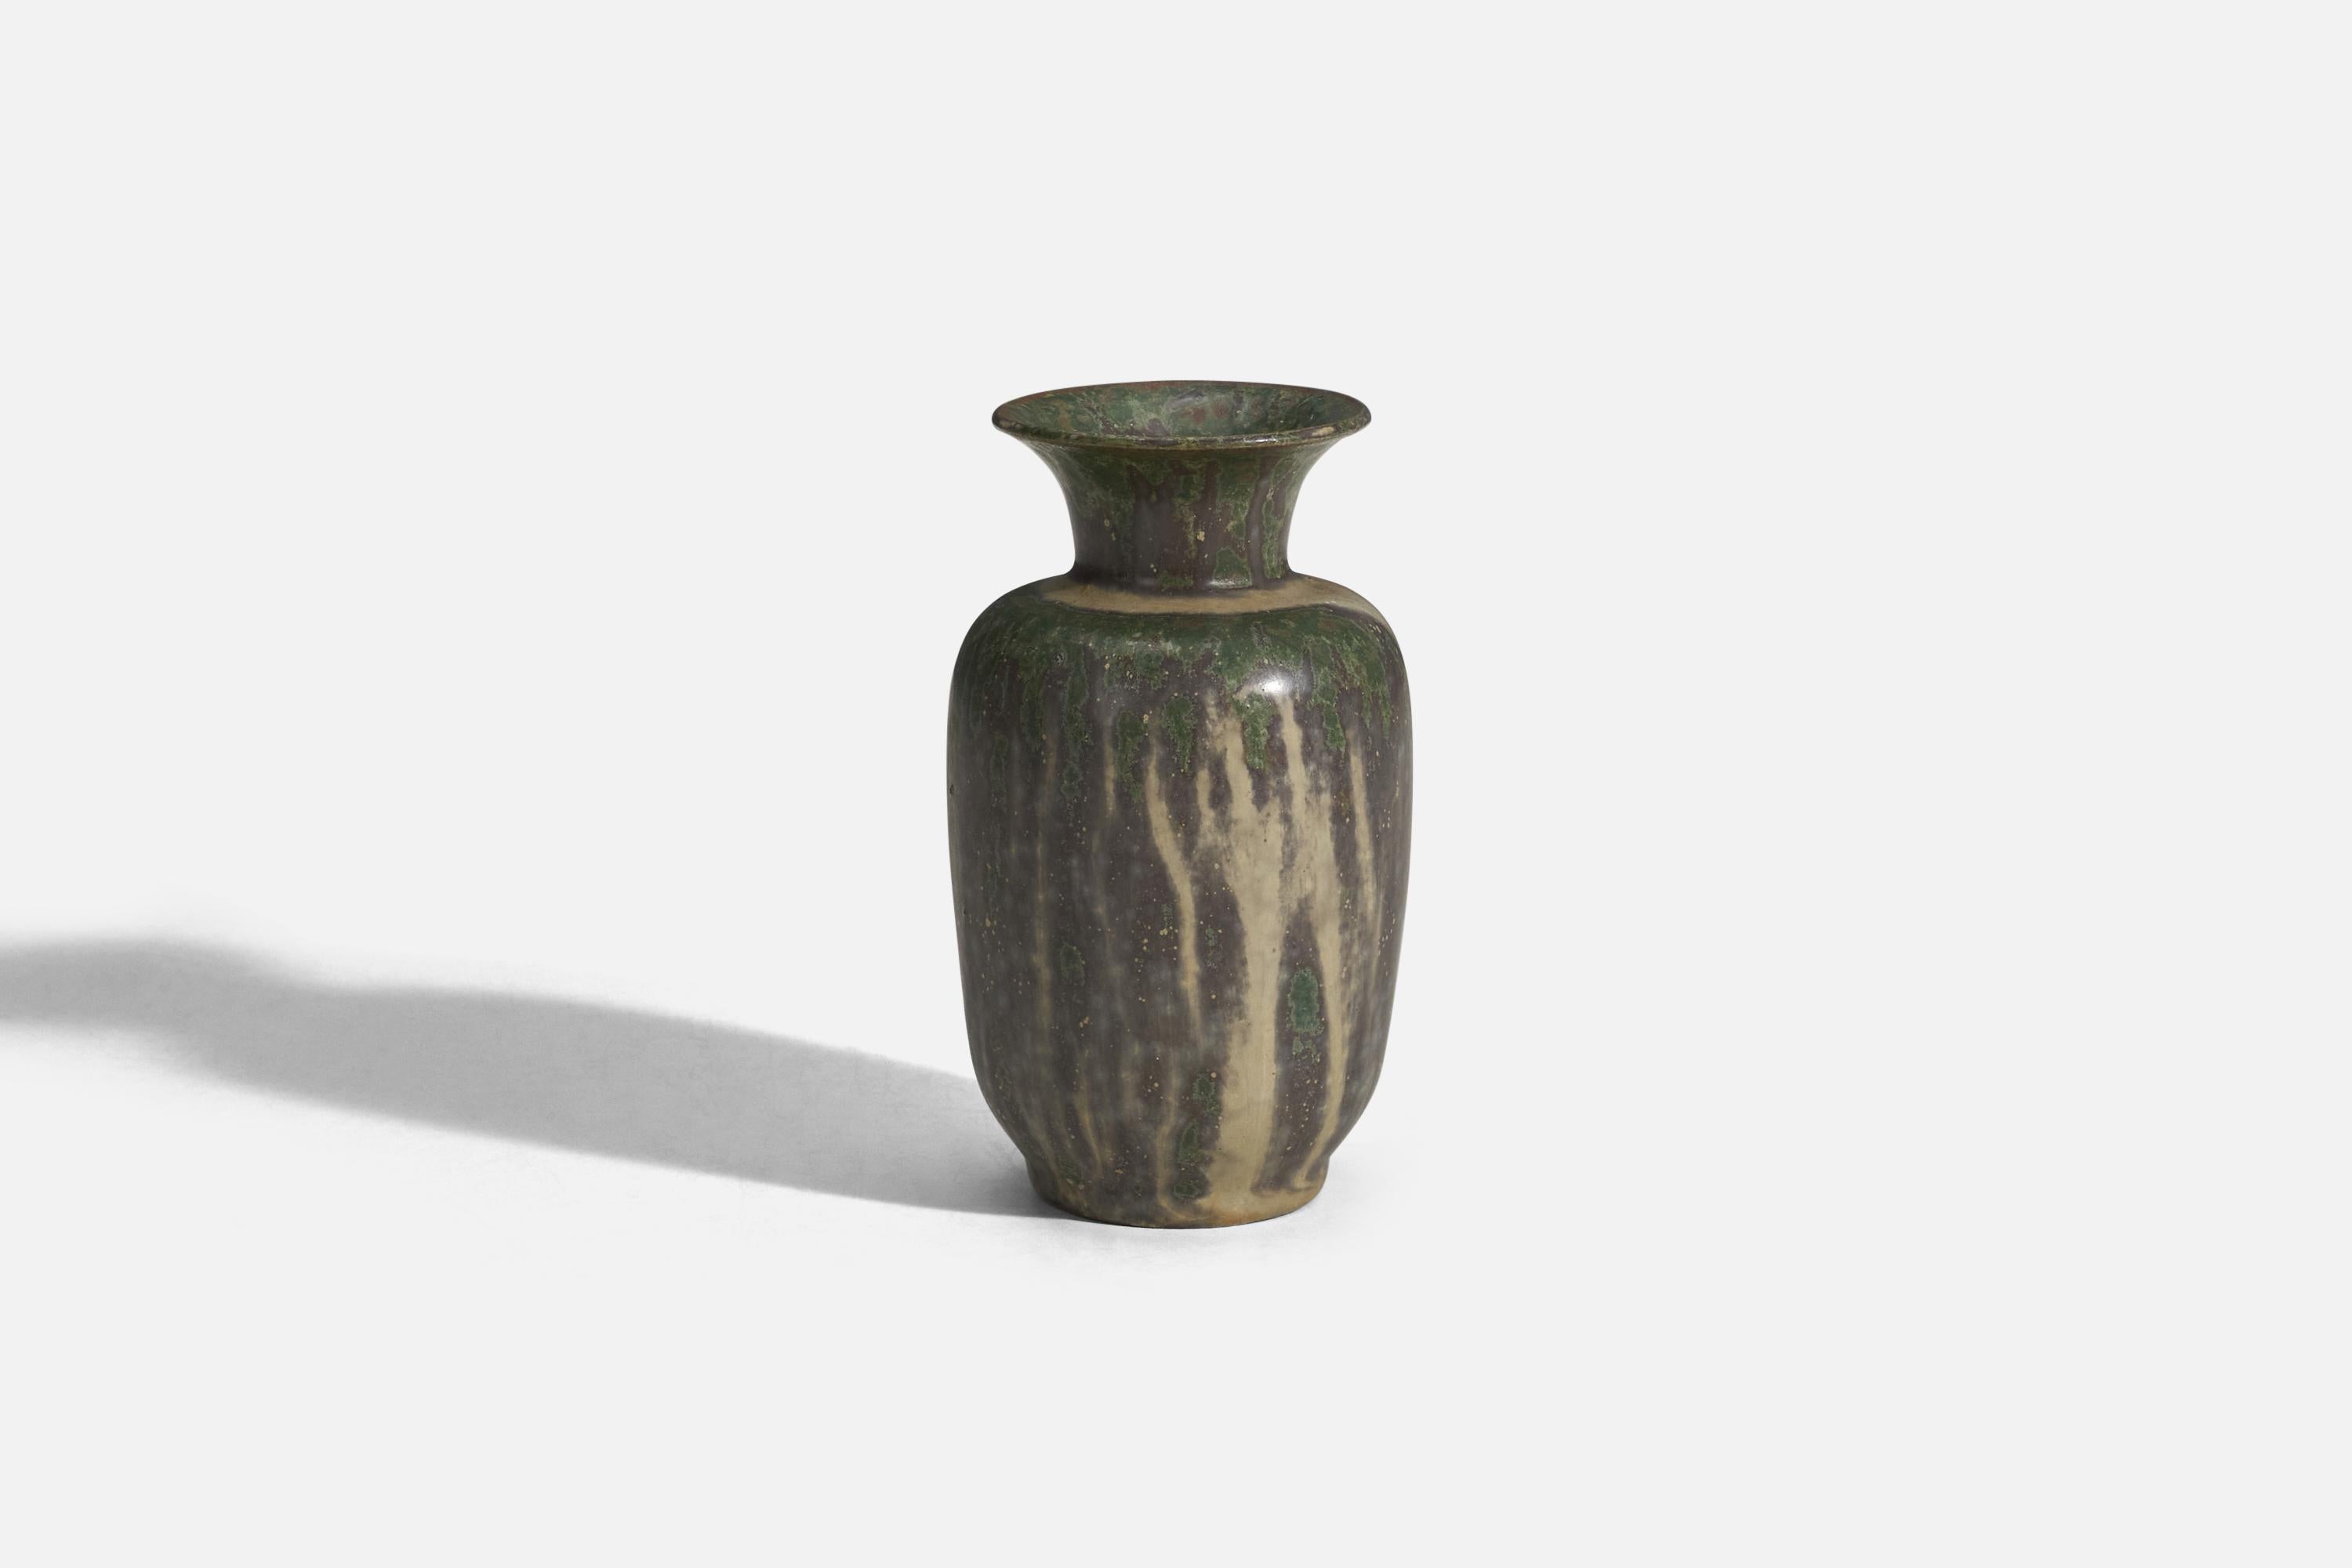 A grey and green glazed stoneware vase designed and produced by Arne Bang, Denmark, 1940s.